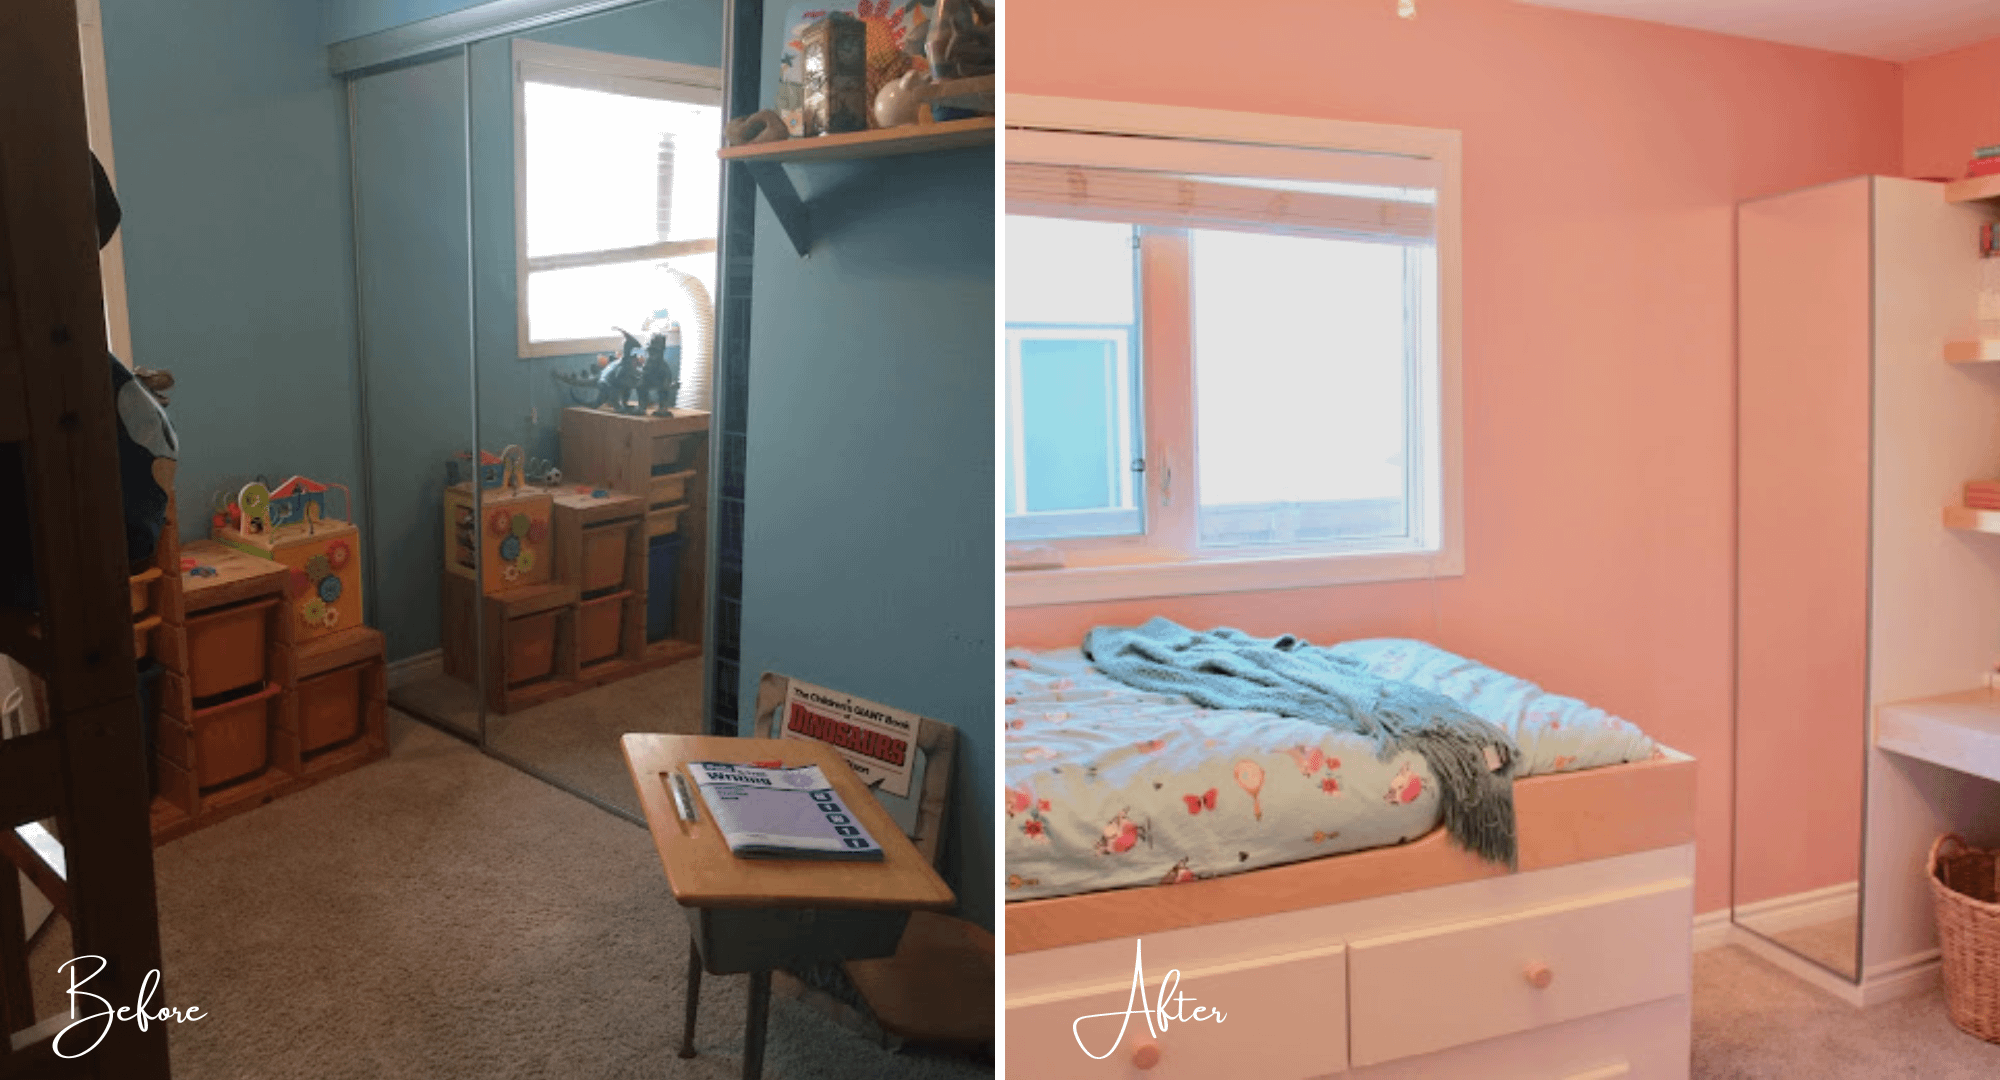 Before and after photo of the closet space in this bedroom makeover